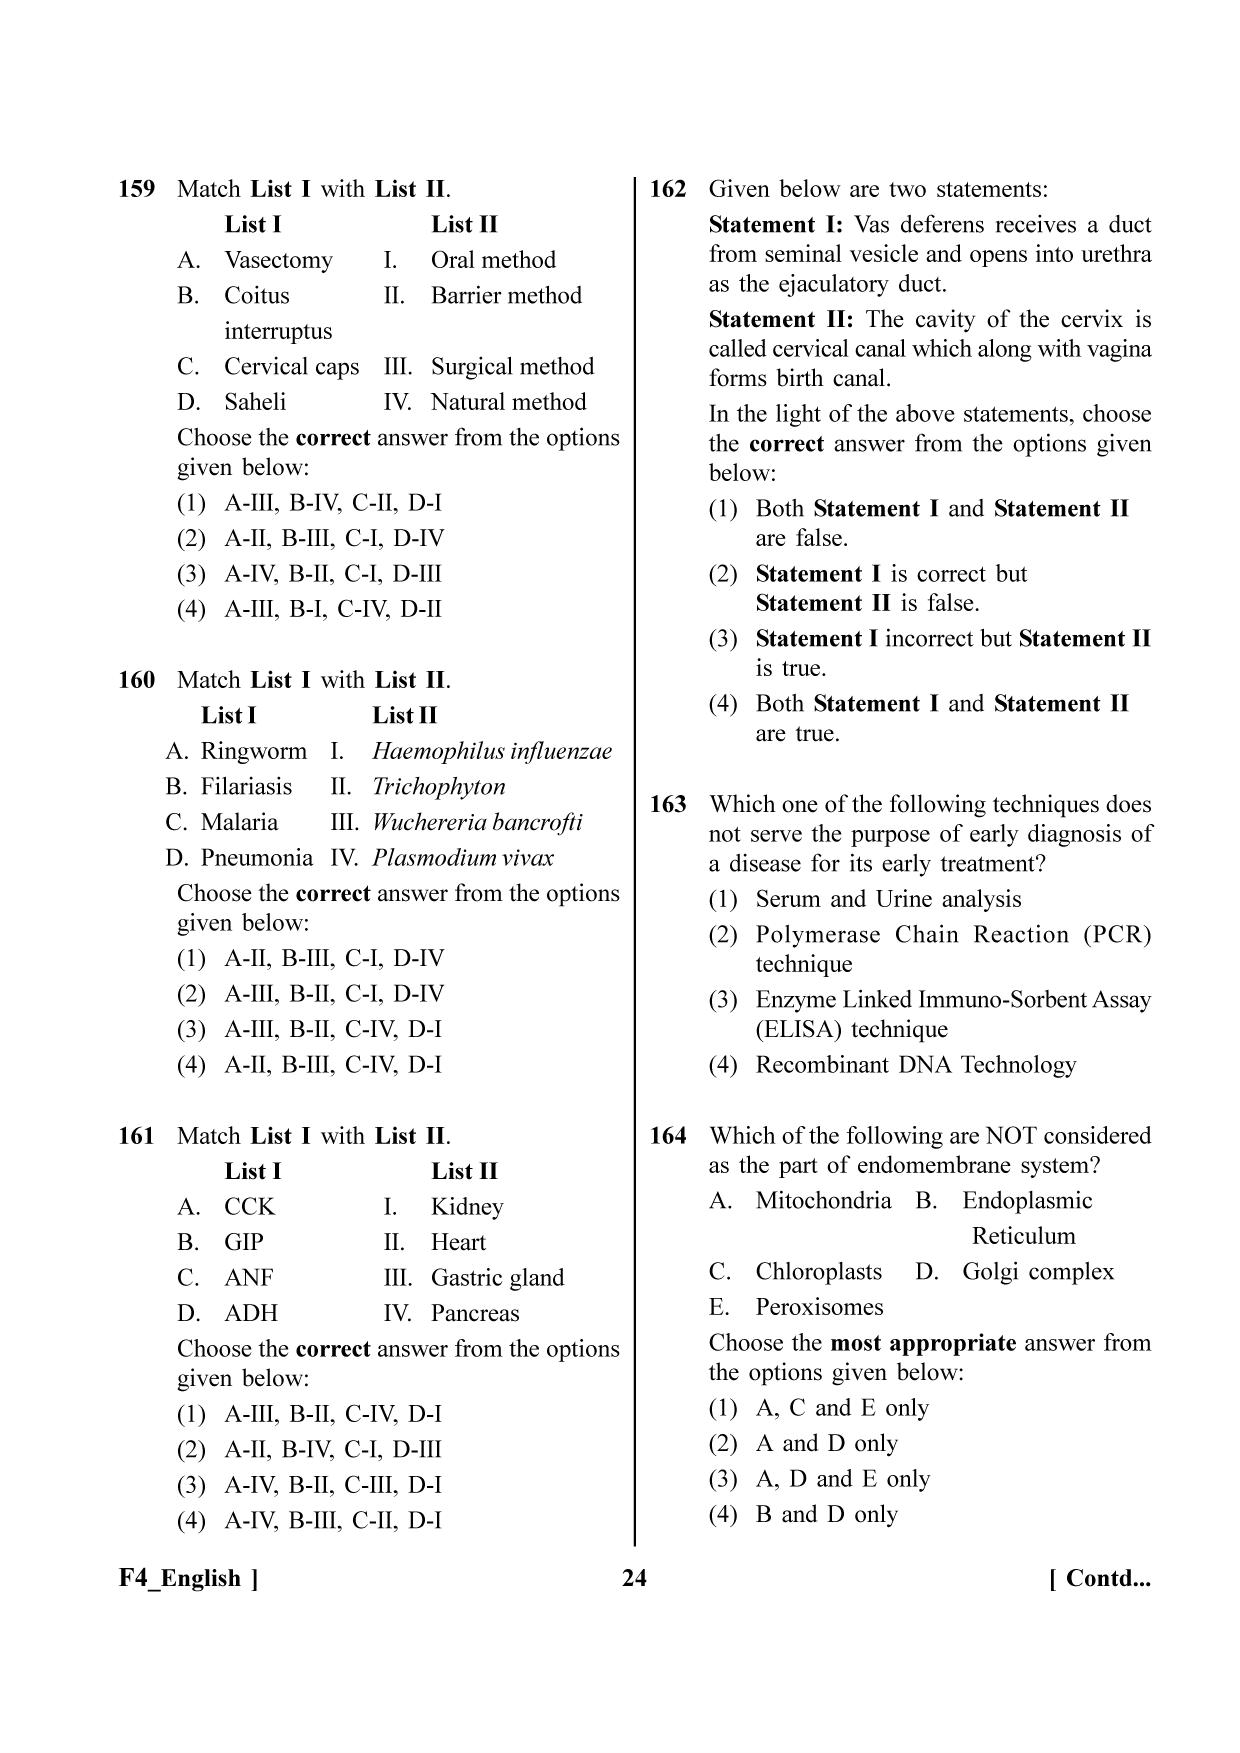 NEET 2023 F4 Question Paper - Page 24